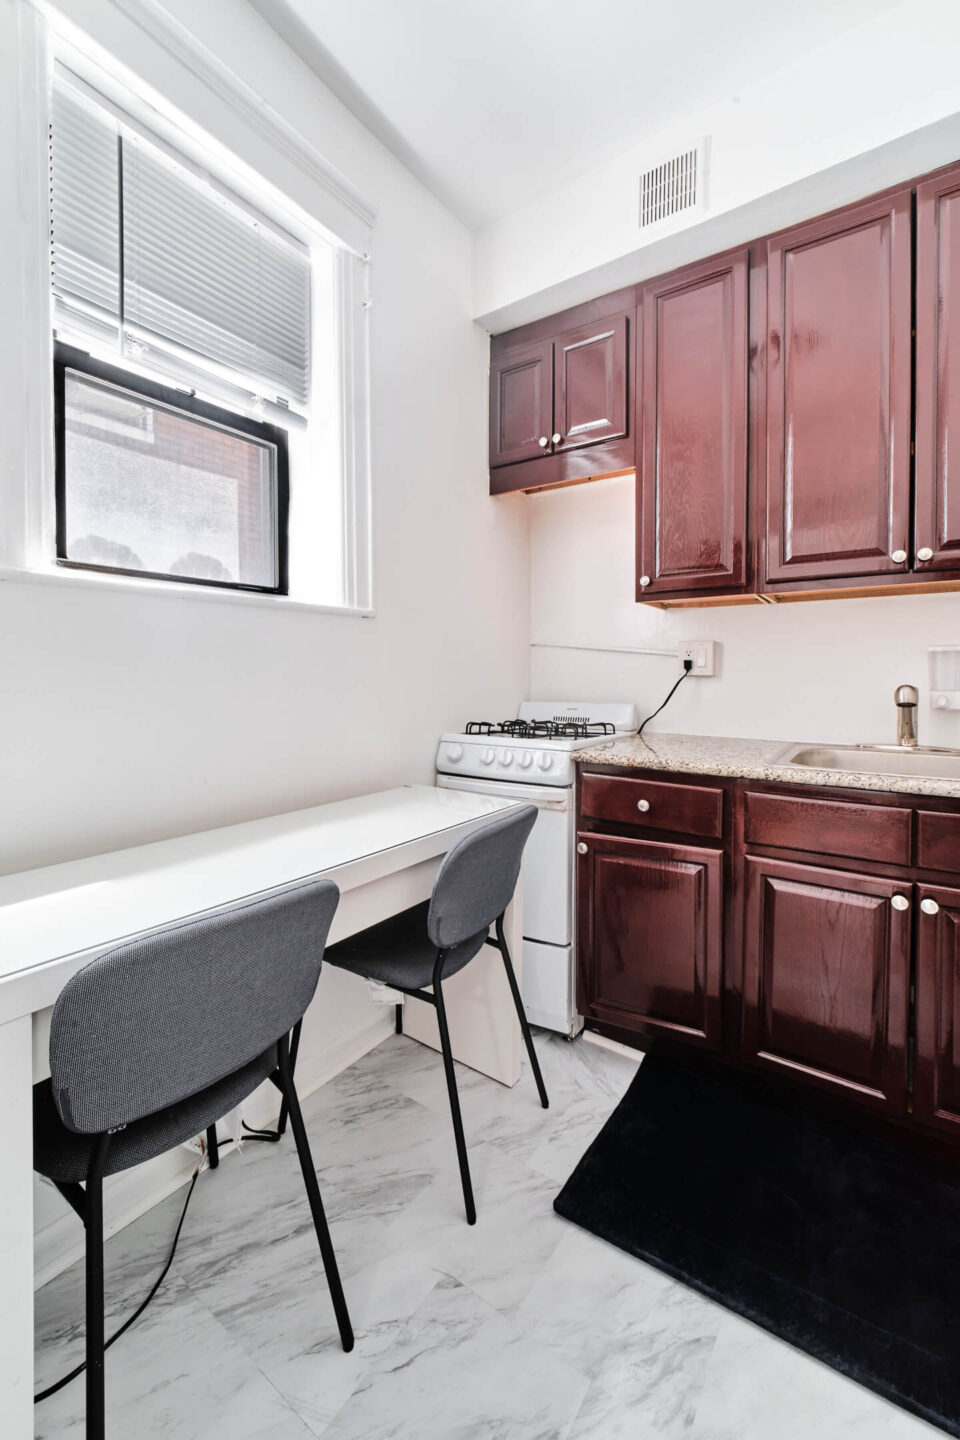 41-32 76th St, East Elmhurst, NY 11373 - Apt 2 - Real Estate Photography - AirBnB Listing